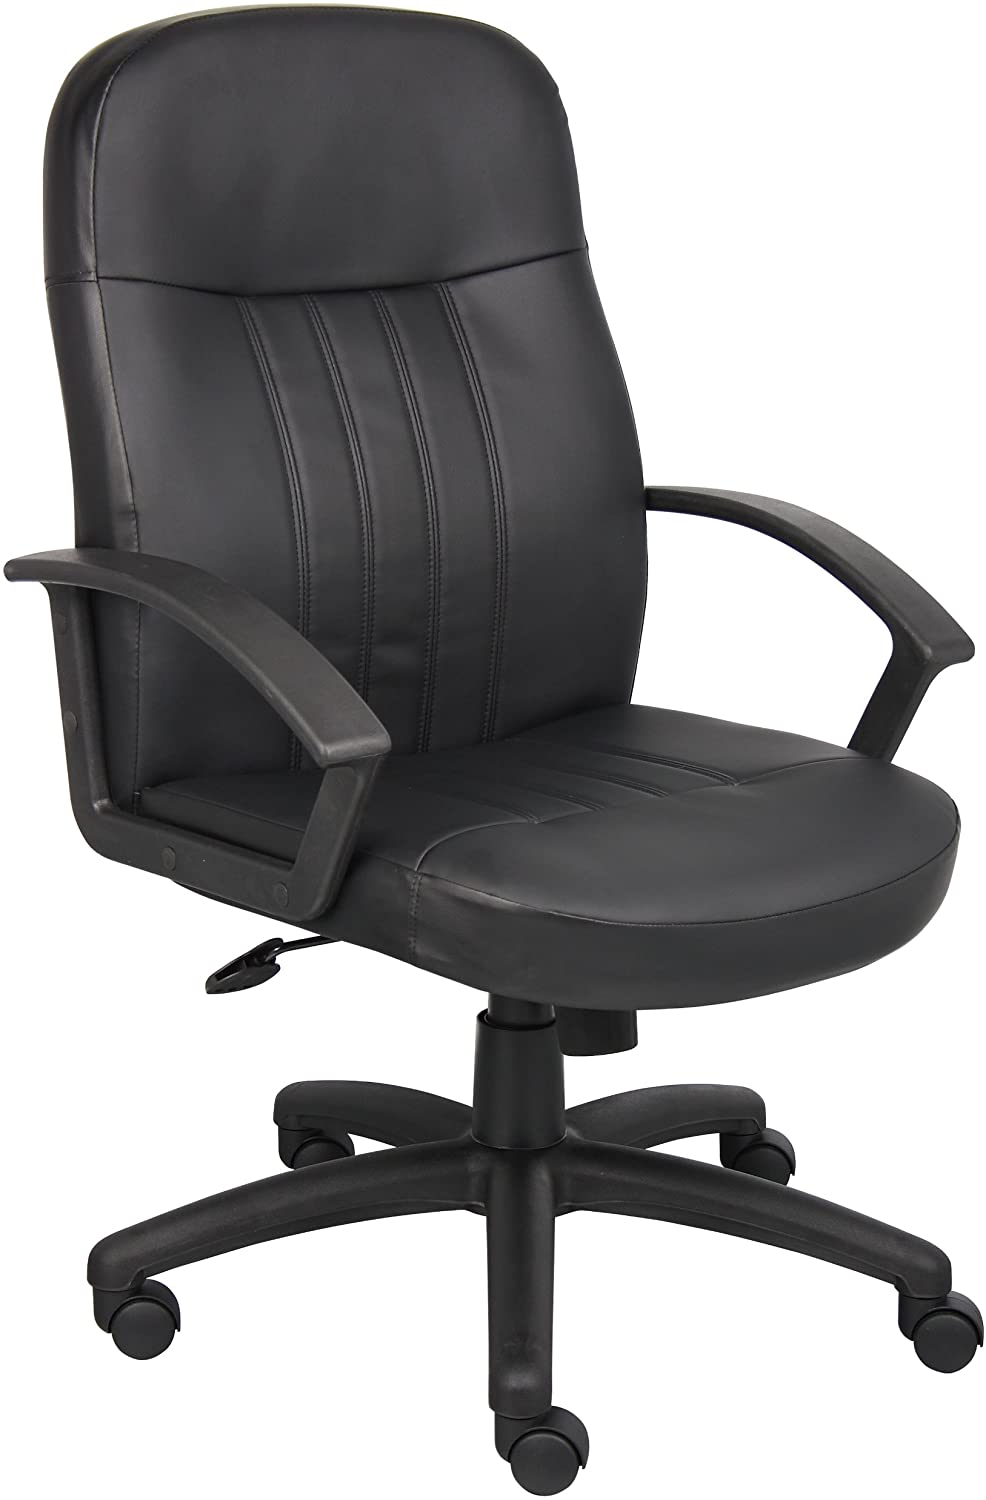 Boss Office Products Executive Leather Budged Chair in Black